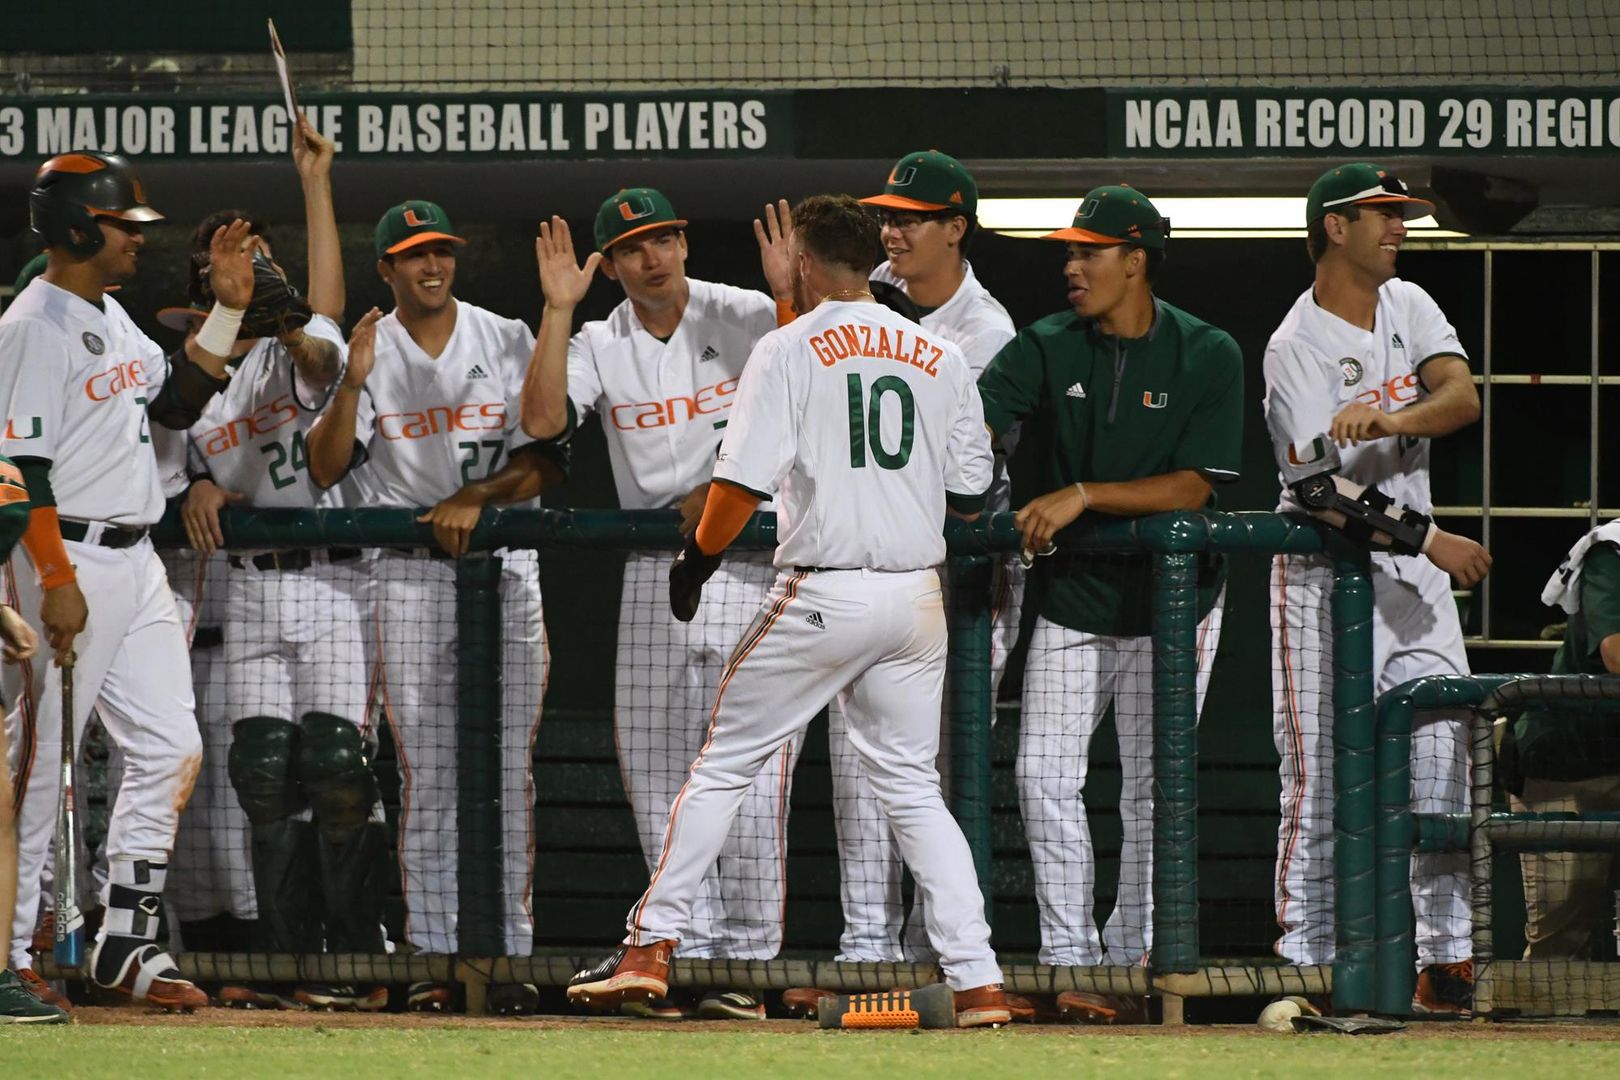 Canes Take Down #8 Clemson In Historic Comeback, 12-11